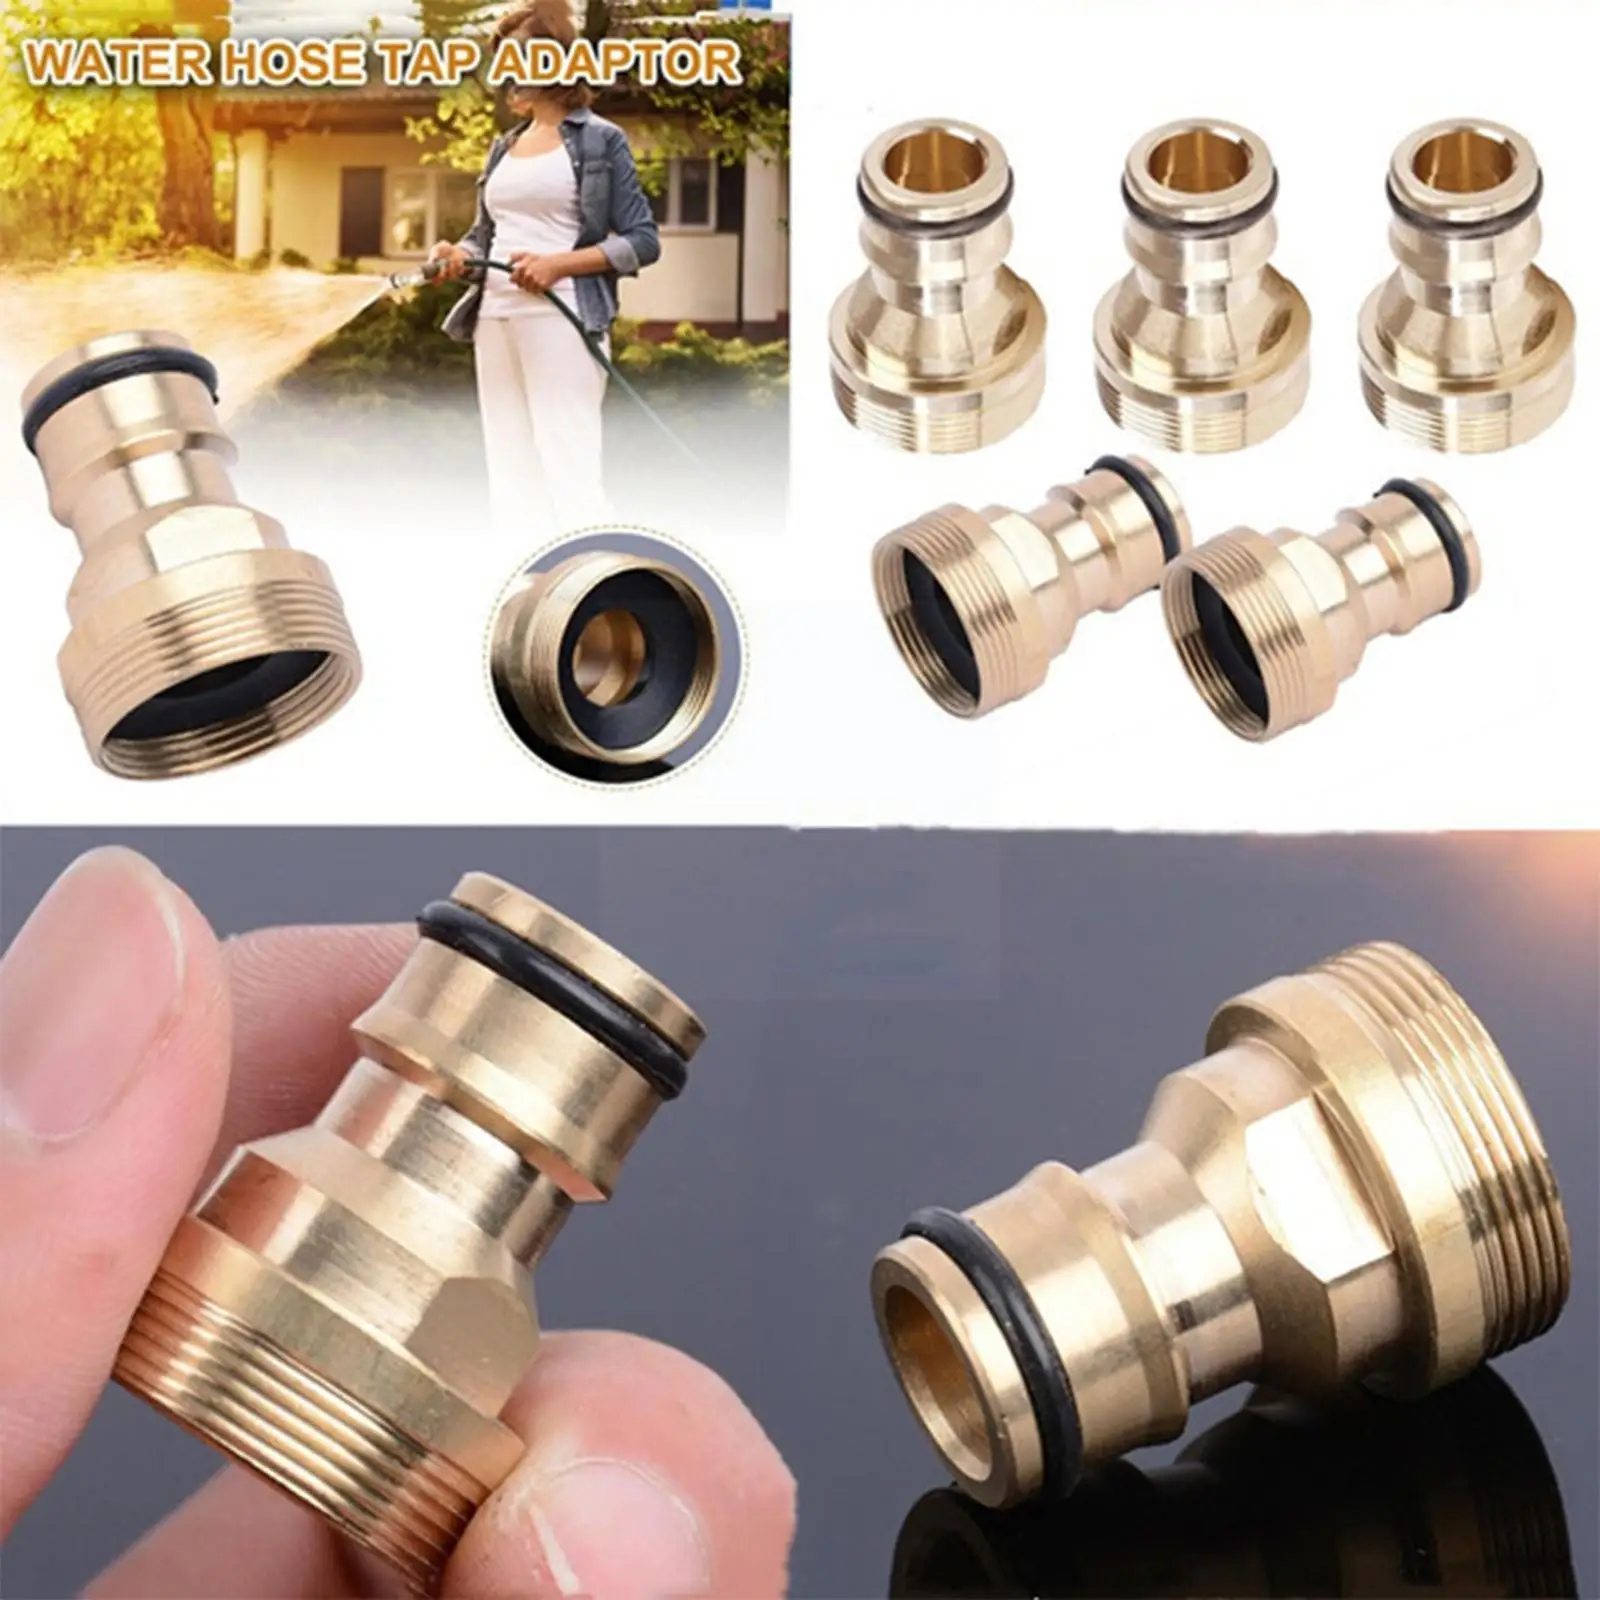 

Universal Kitchen Utensils Adapters for Tap Kitchen Faucet Tap Connector Mixer Hose Adaptor Pipe Joiner Fitting Faucet Adap D1F7